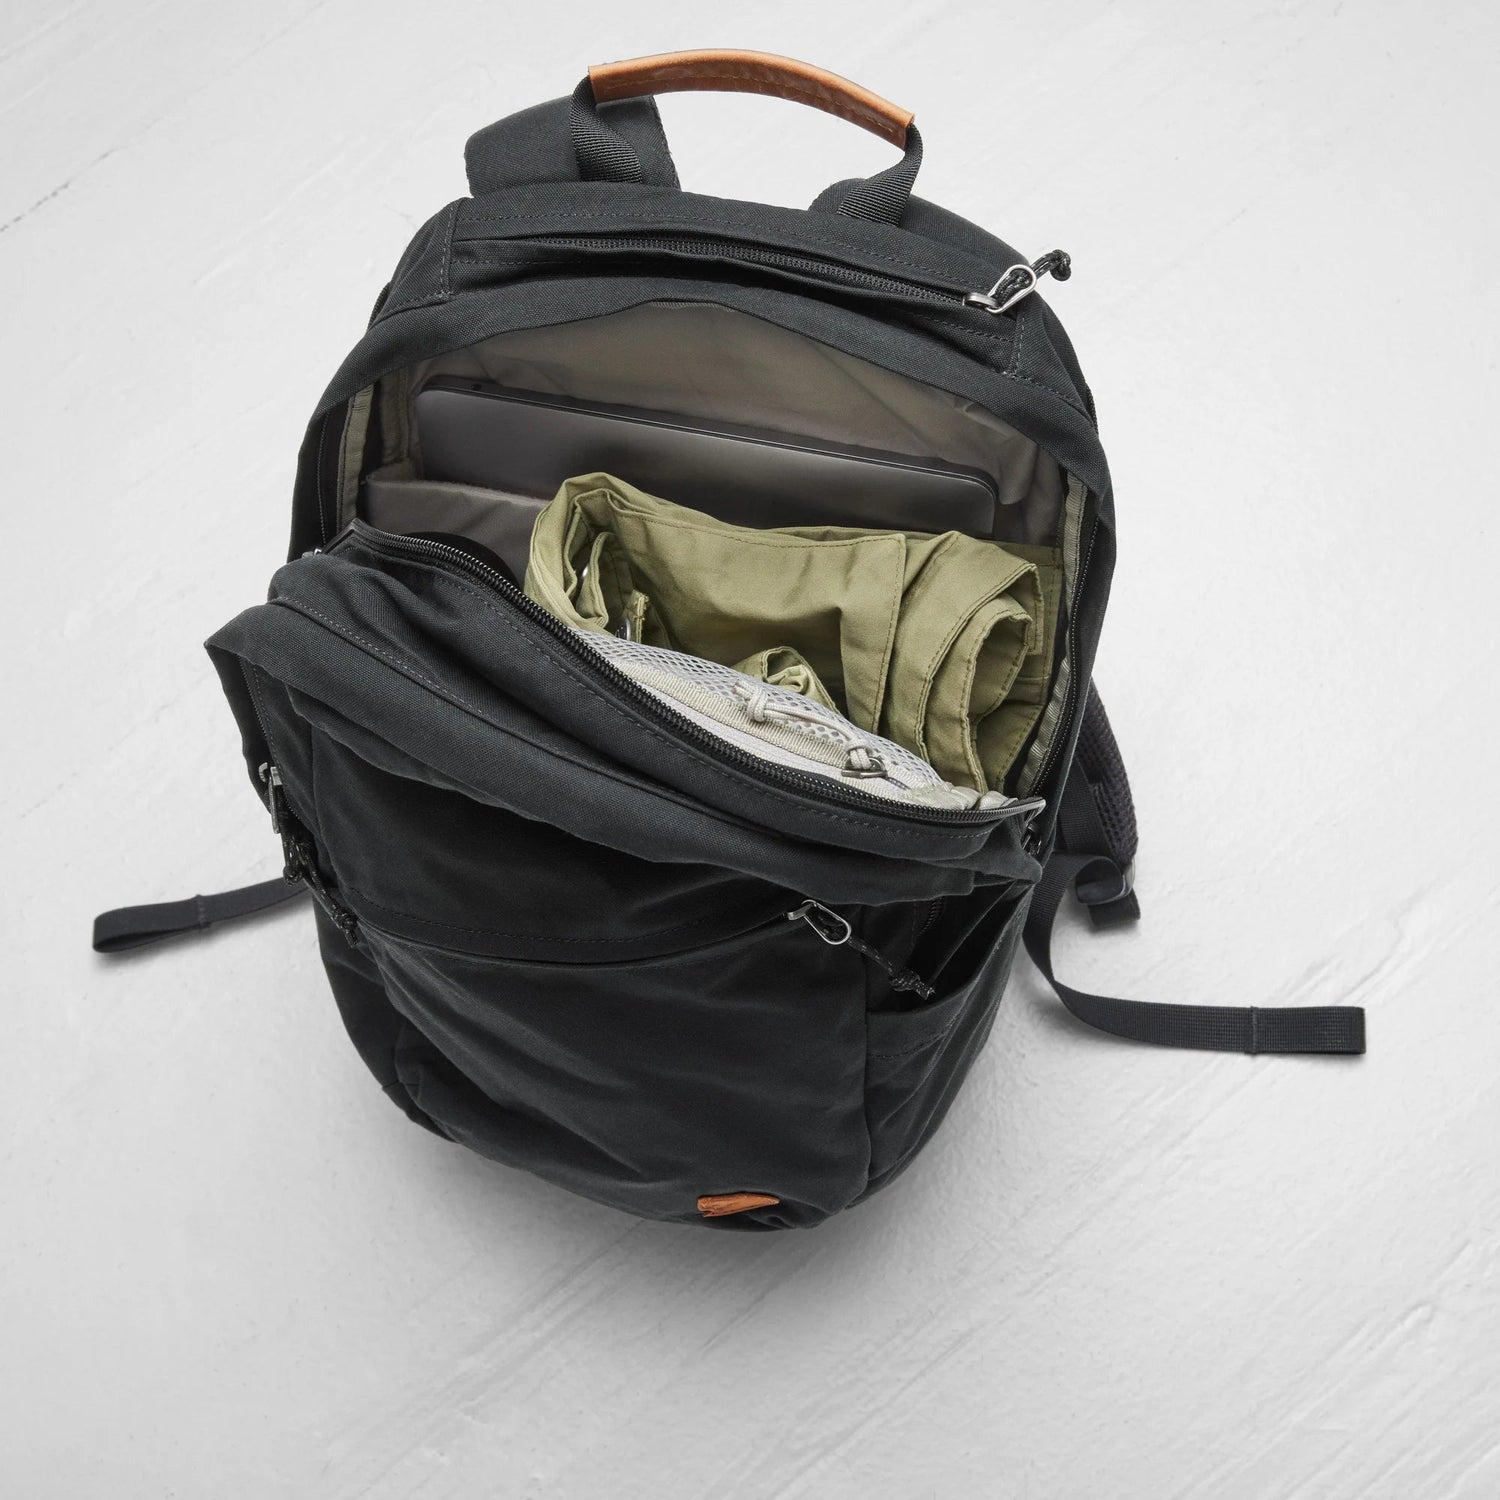 Fjällräven Räven 20l Backpack - Recycled Polyester & Organic Cotton Black Bags